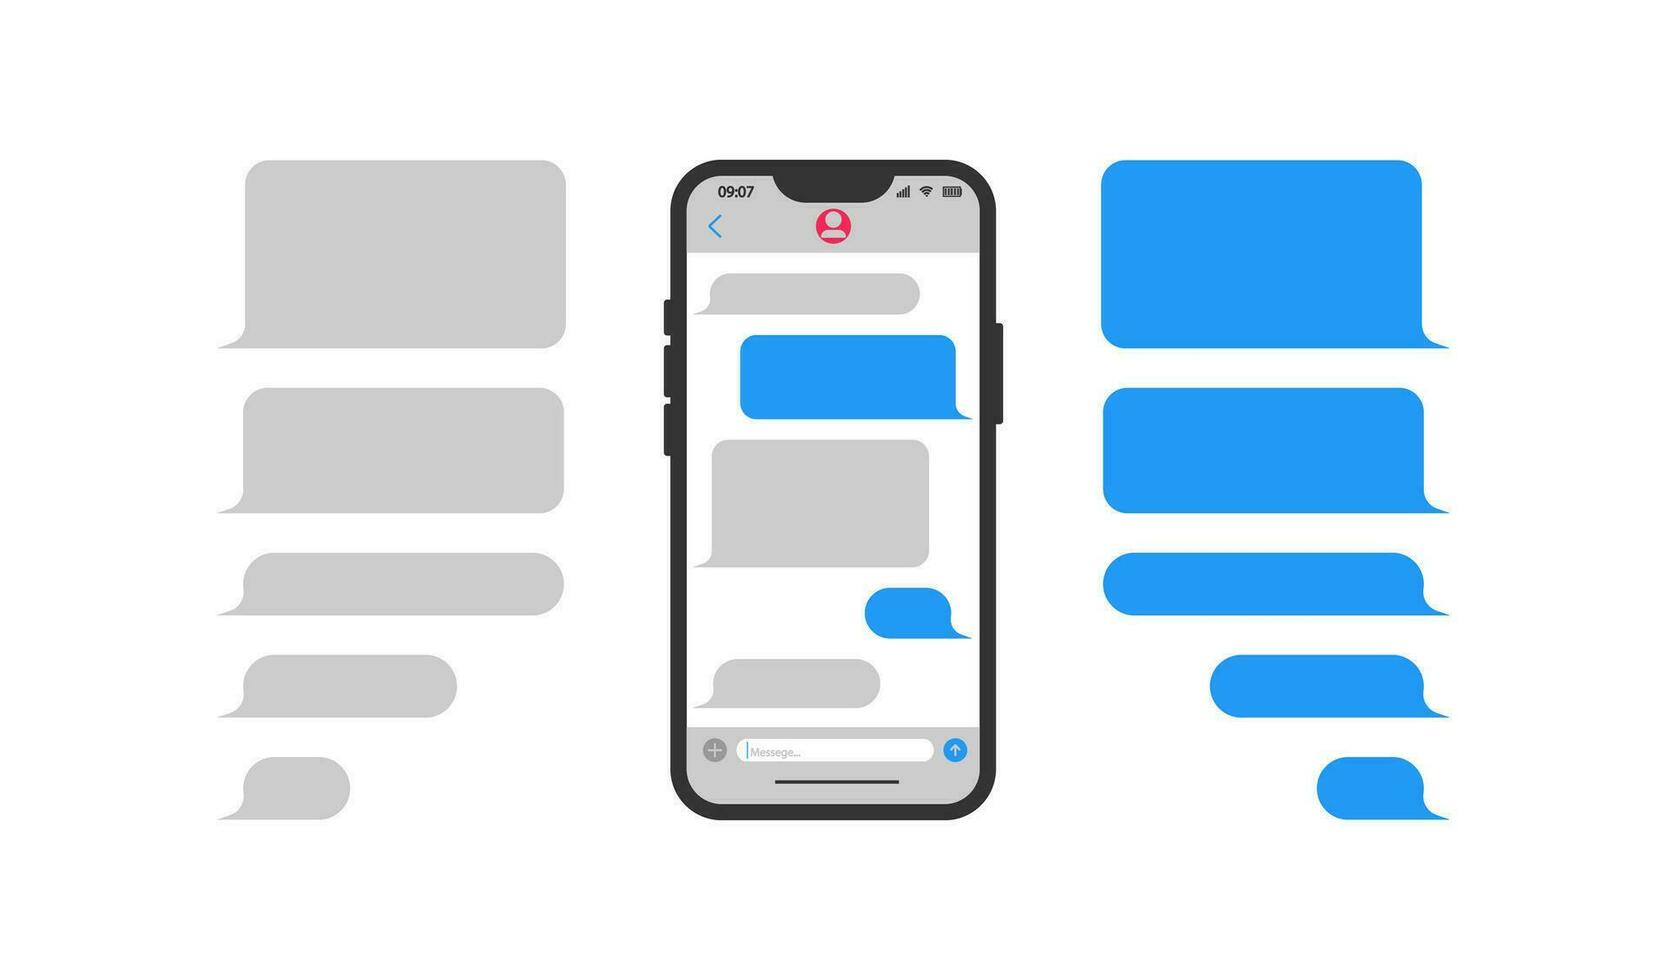 Chat Interface Application with Dialogue window smartphone icon. Bubble messege and phone illustration symbol. Sign messaging vector